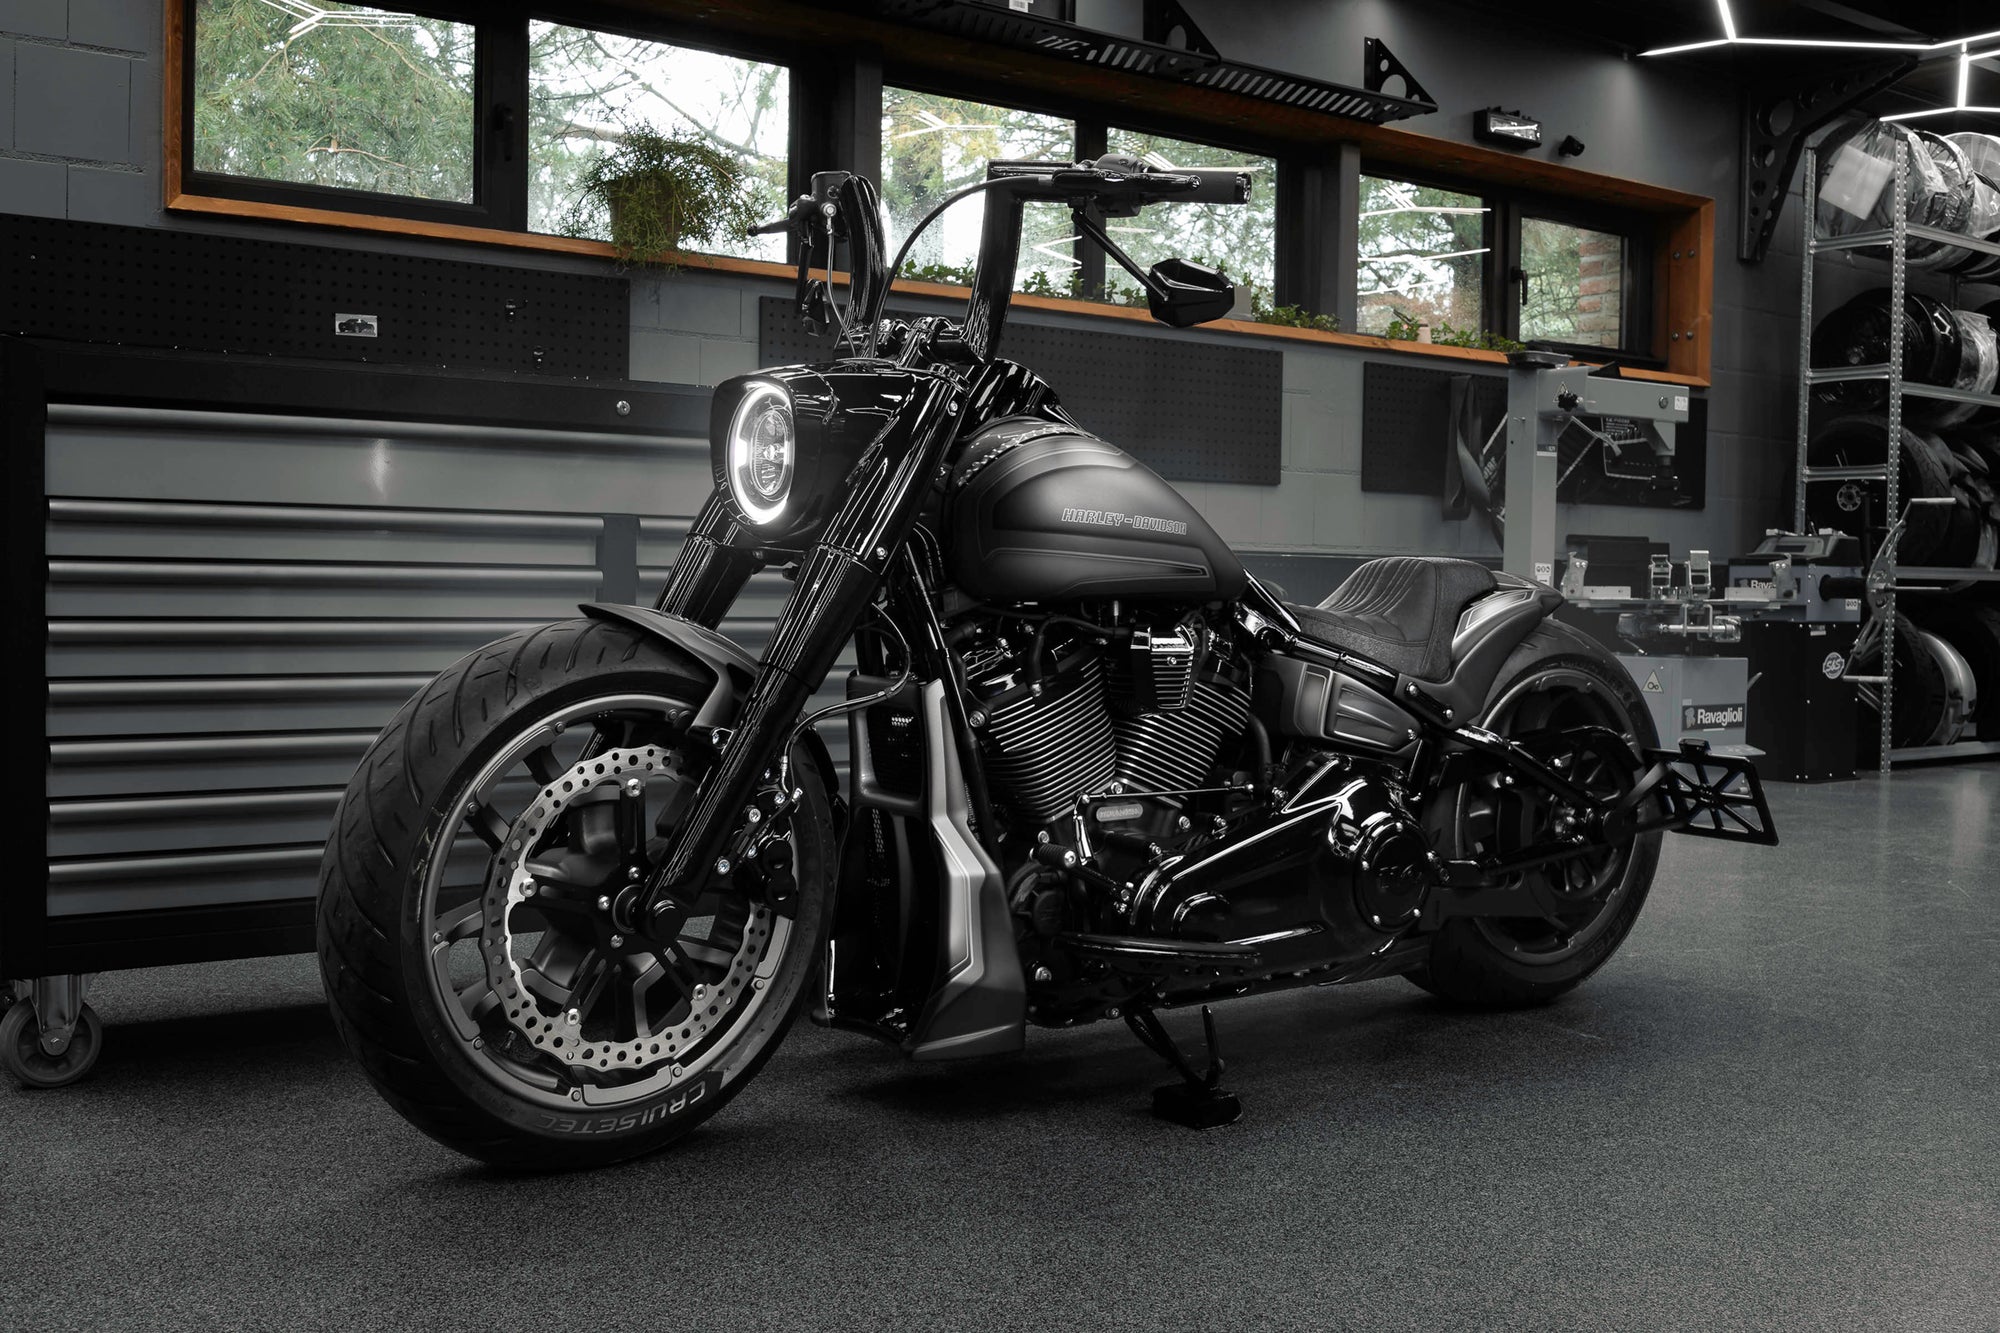 Harley Davidson motorcycle with Killer Custom parts from the side in a modern bike shop with some windows in the background